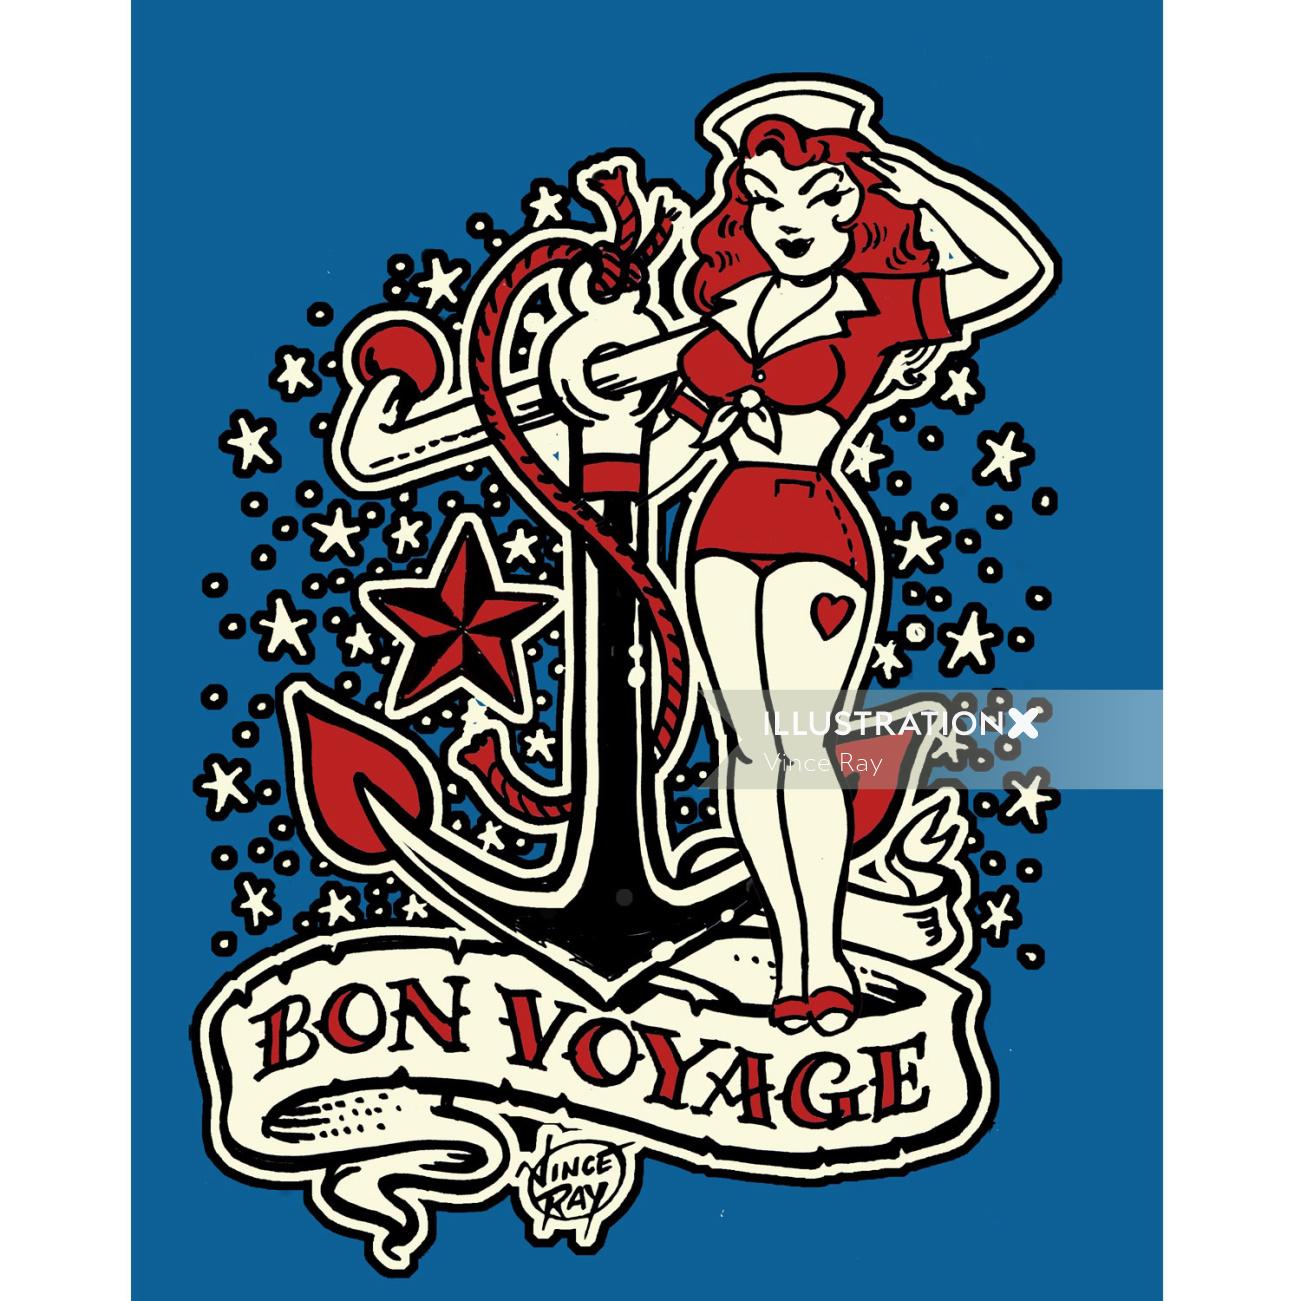 Illustration of Bon Voyage cover by Vince Ray